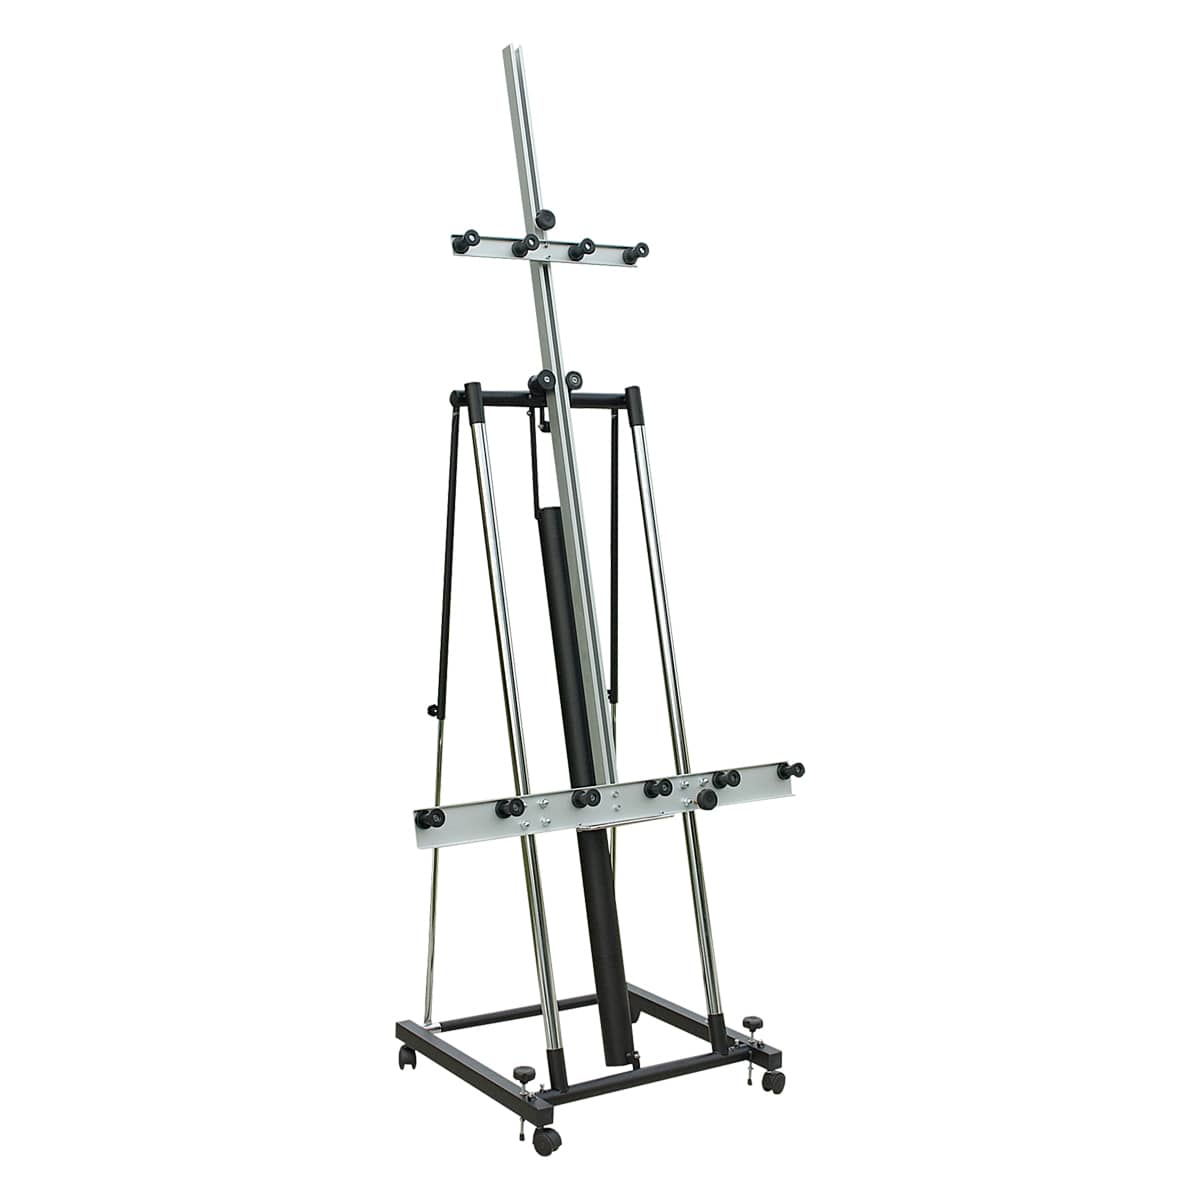 SoHo Urban Artist Watercolor Field Easel for Painting Portable, LightWeight  & Adjustable 22 to 79.5 High, Holds Canvas Size up to 60 Weight 3.5lbs -  Black 